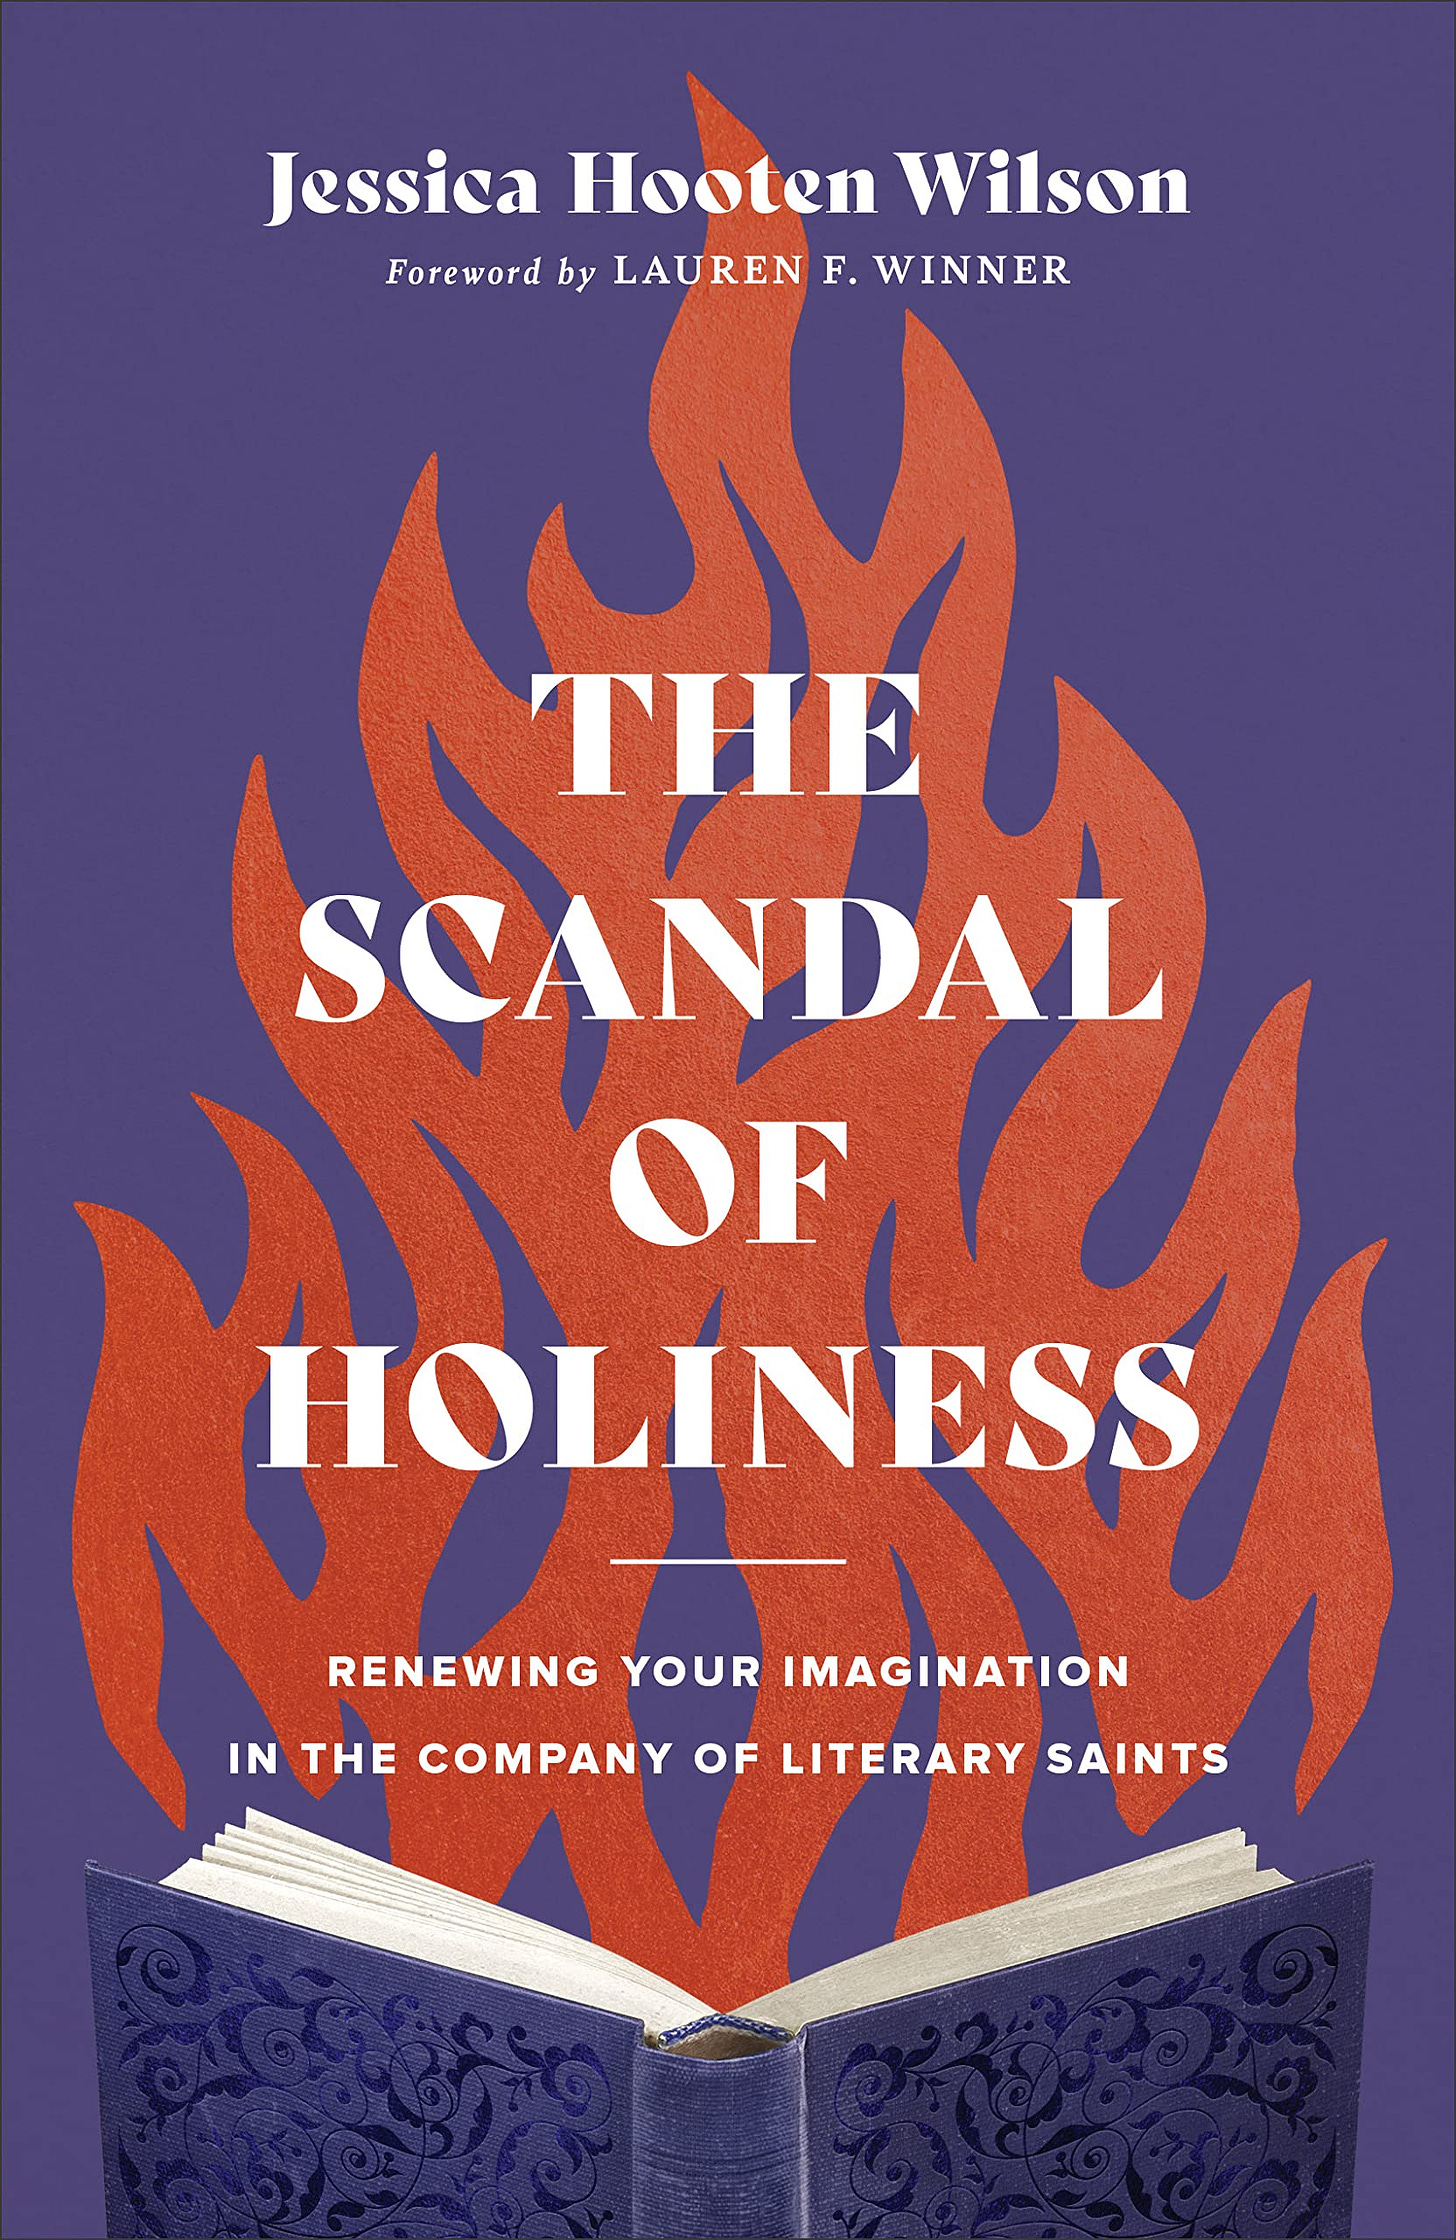 The Scandal of Holiness: Renewing Your Imagination in the Company of  Literary Saints: Wilson, Jessica Hooten, Winner, Lauren: 9781587435249:  Amazon.com: Books